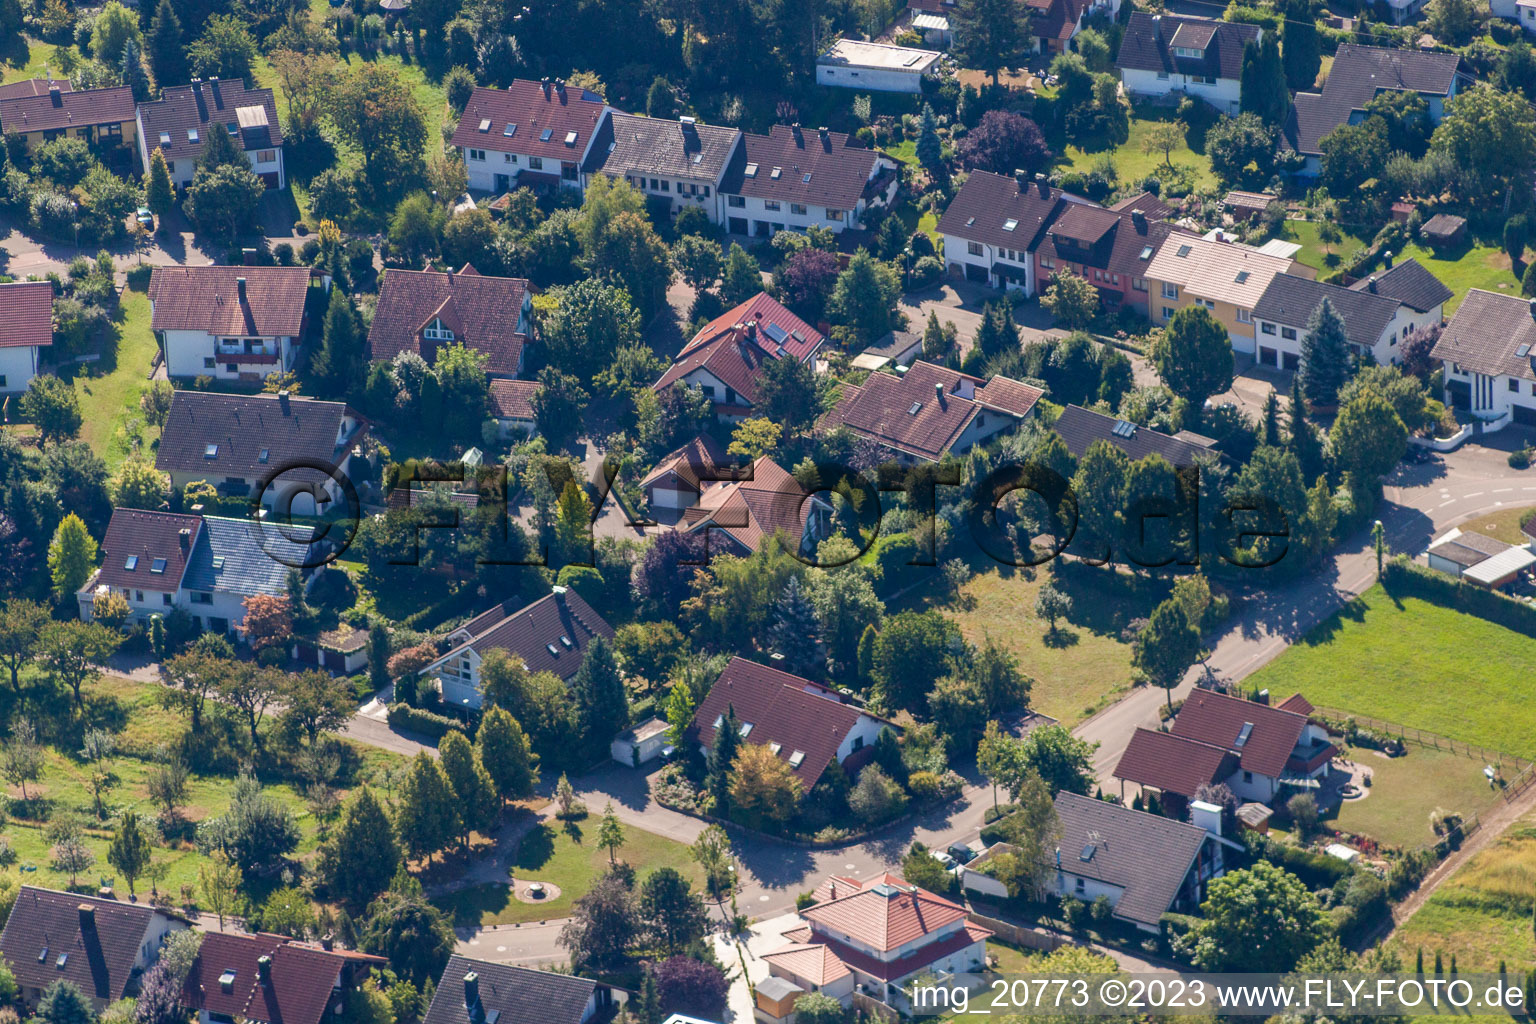 Aerial view of In the Ries in the district Fessenbach in Offenburg in the state Baden-Wuerttemberg, Germany